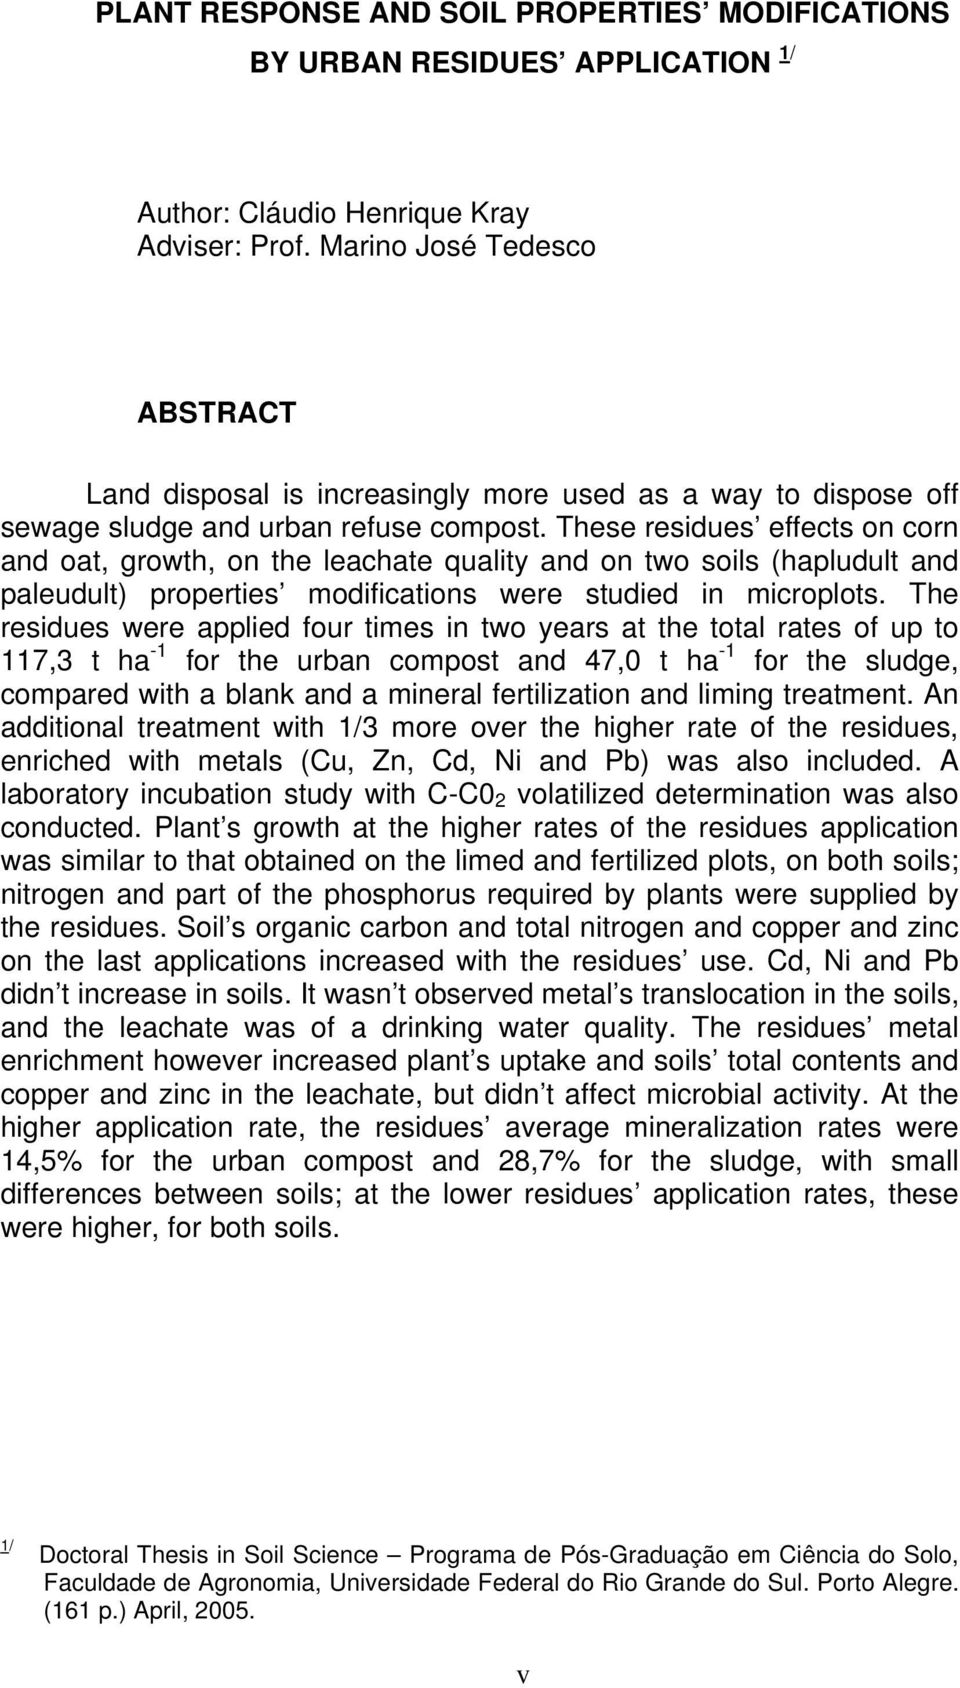 These residues effects on corn and oat, growth, on the leachate quality and on two soils (hapludult and paleudult) properties modifications were studied in microplots.